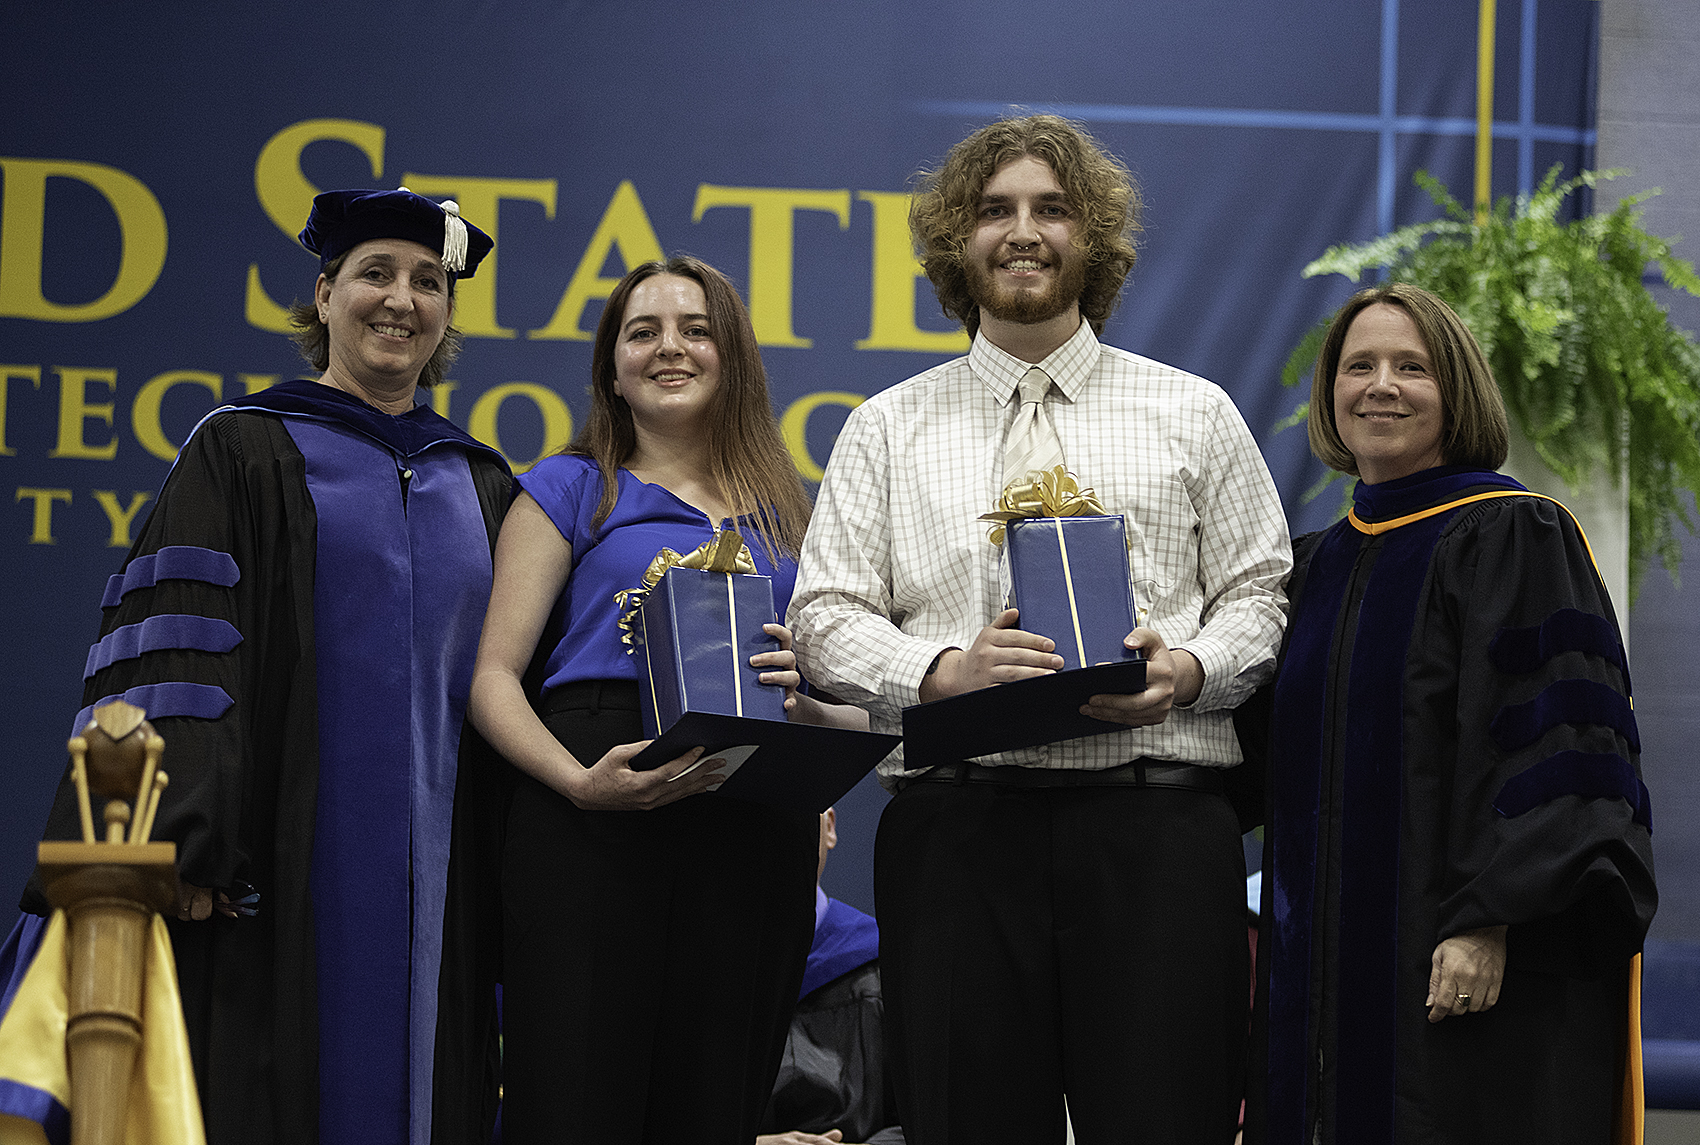 Students from the School of Arts and Sciences honored.